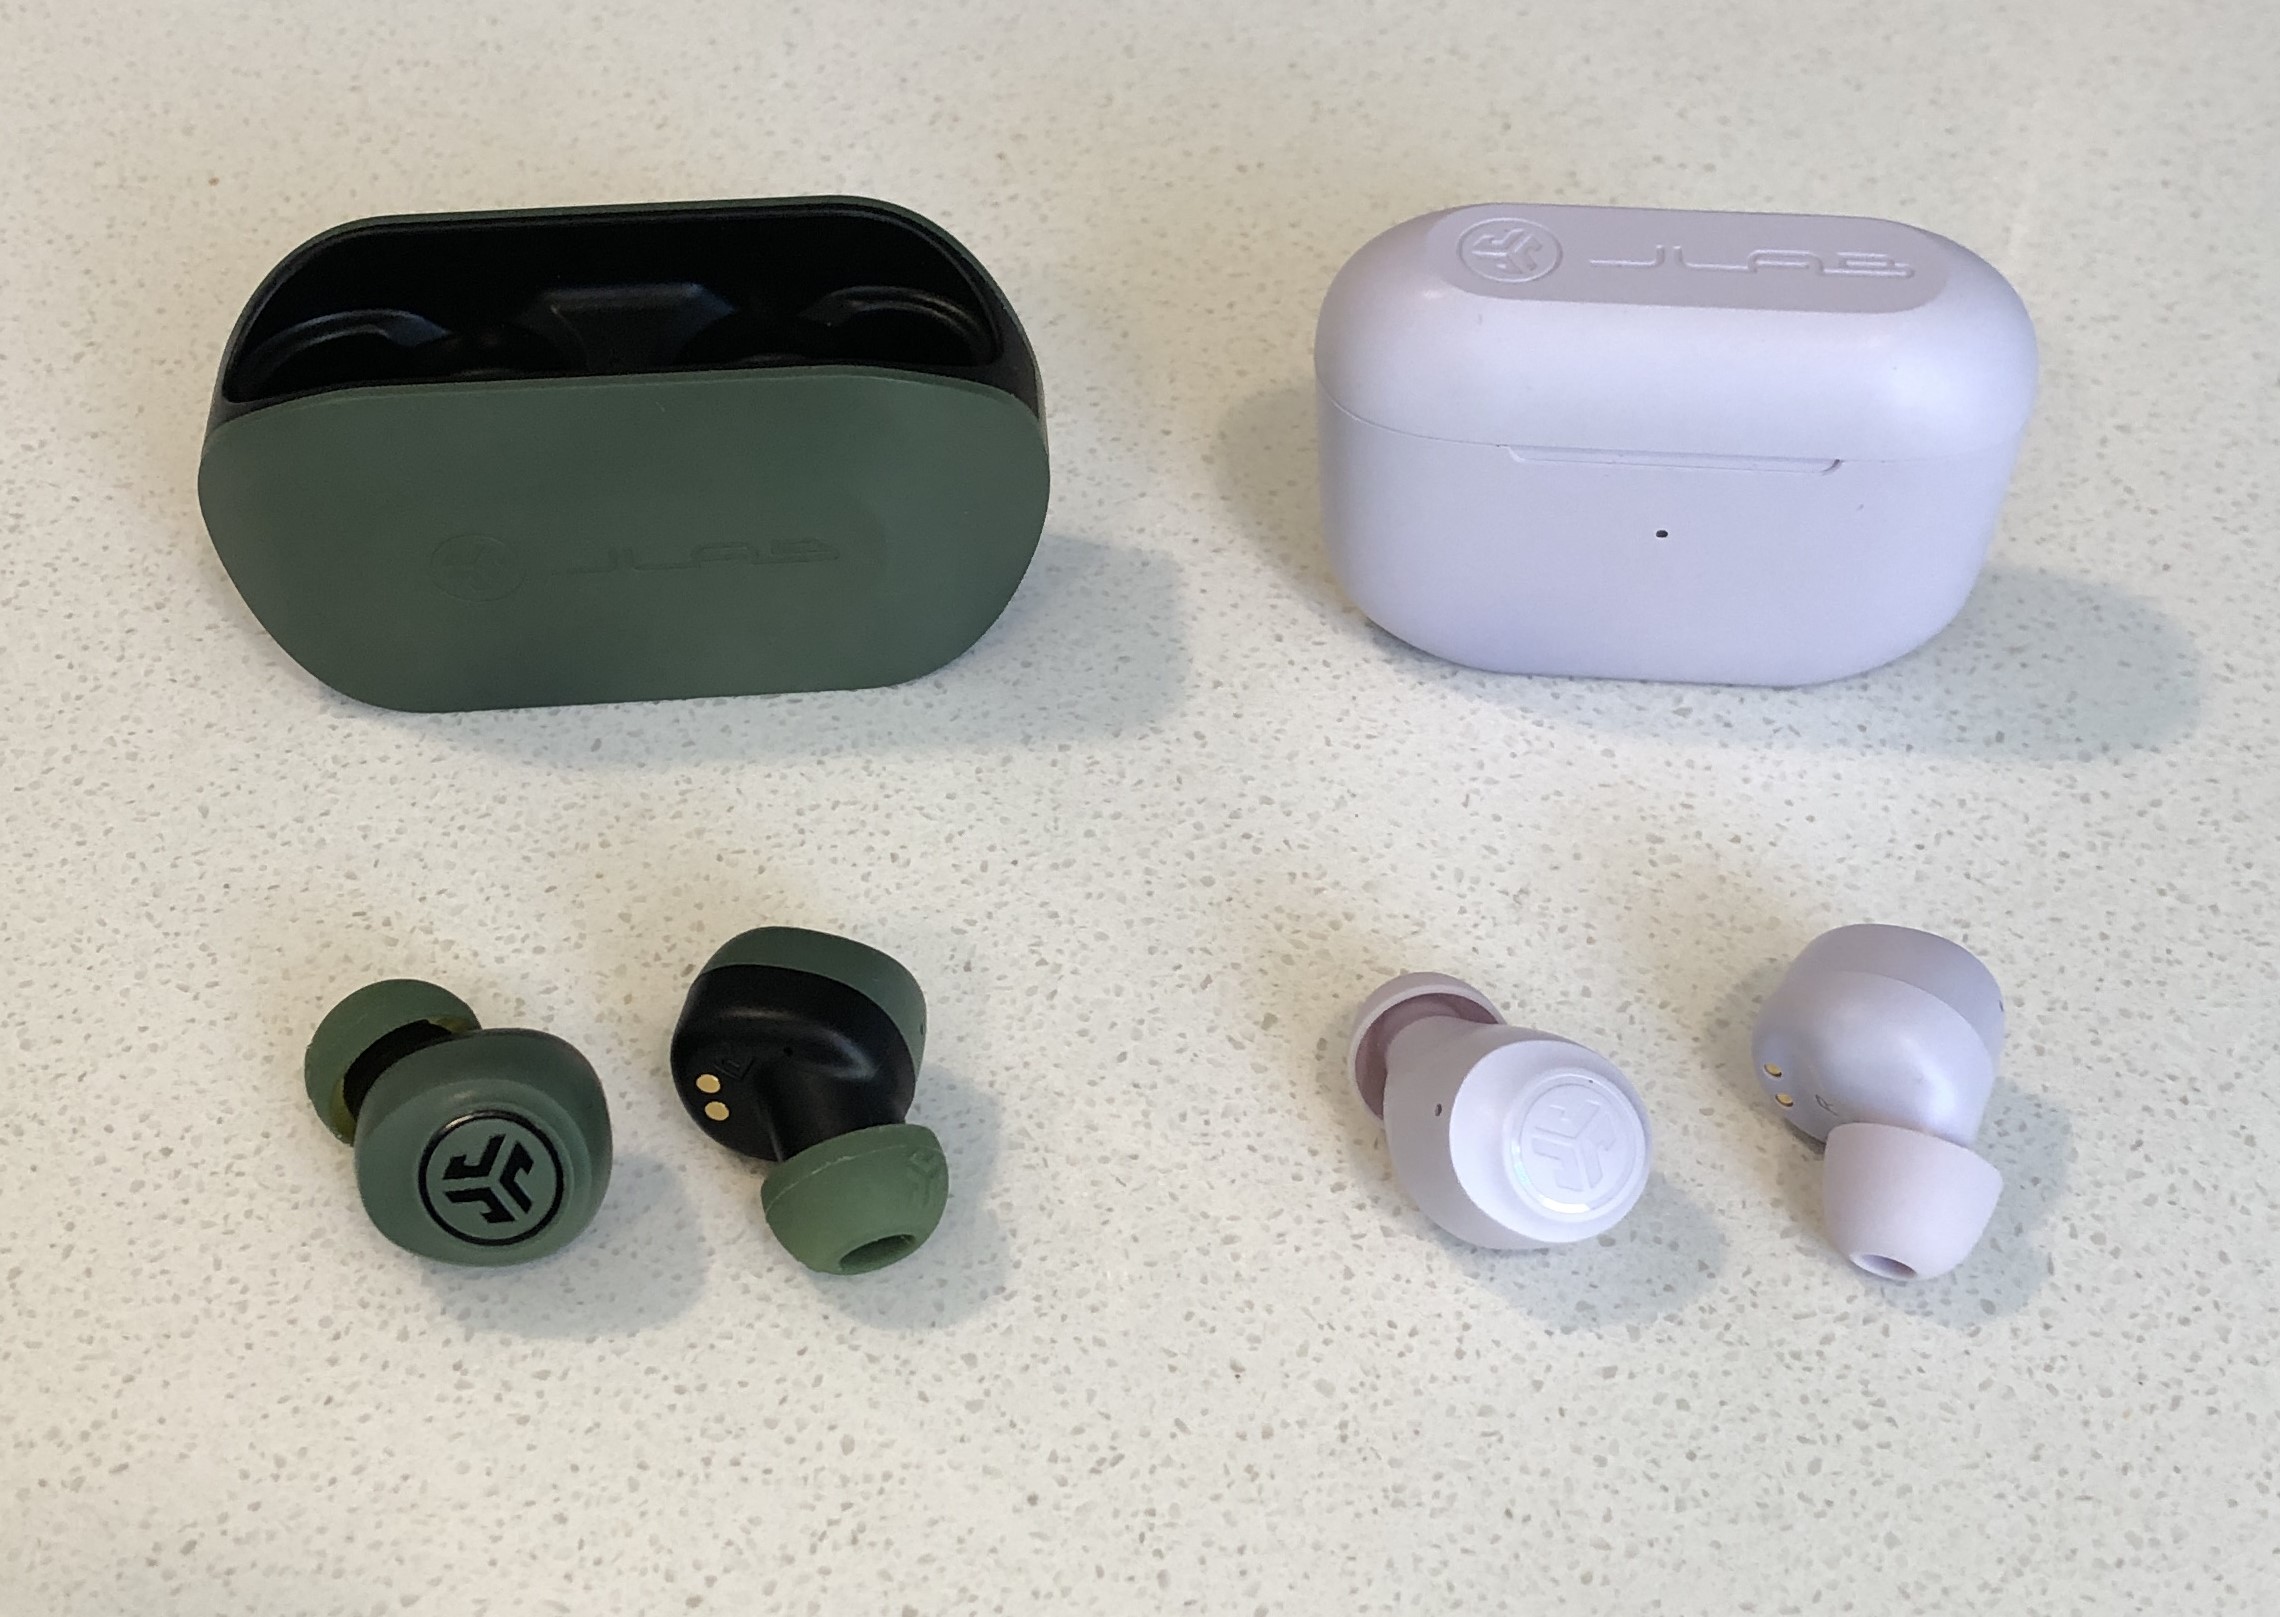 JLab GO Air vs GO Air Pop earbuds and charging case